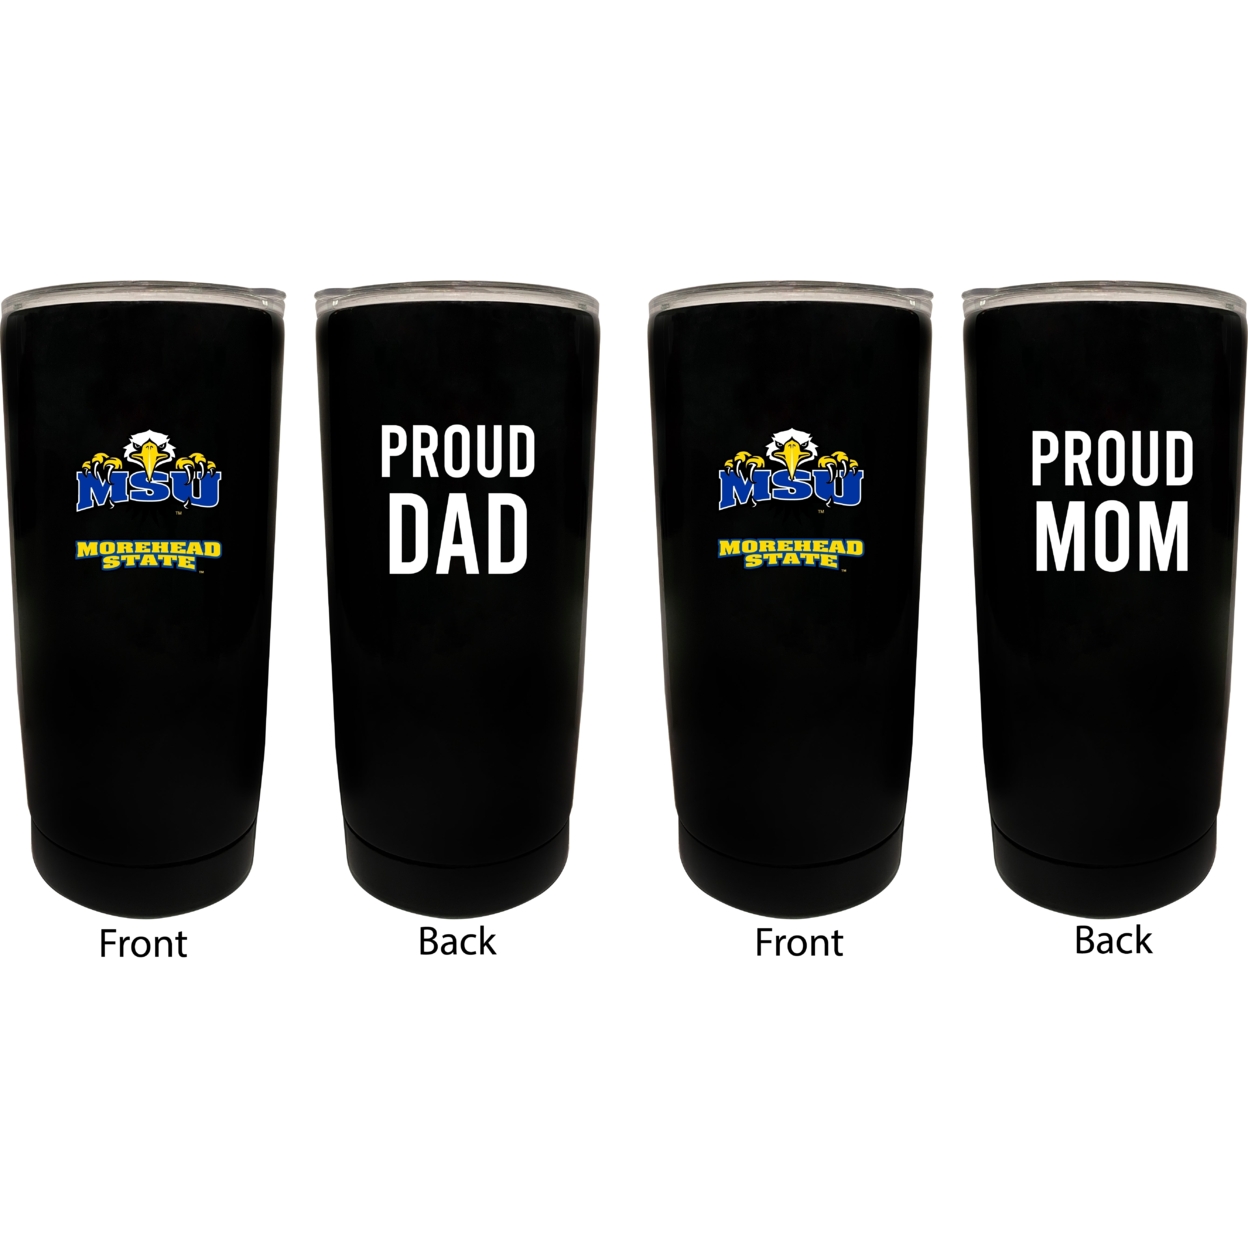 Morehead State University Proud Mom And Dad 16 Oz Insulated Stainless Steel Tumblers 2 Pack Black.